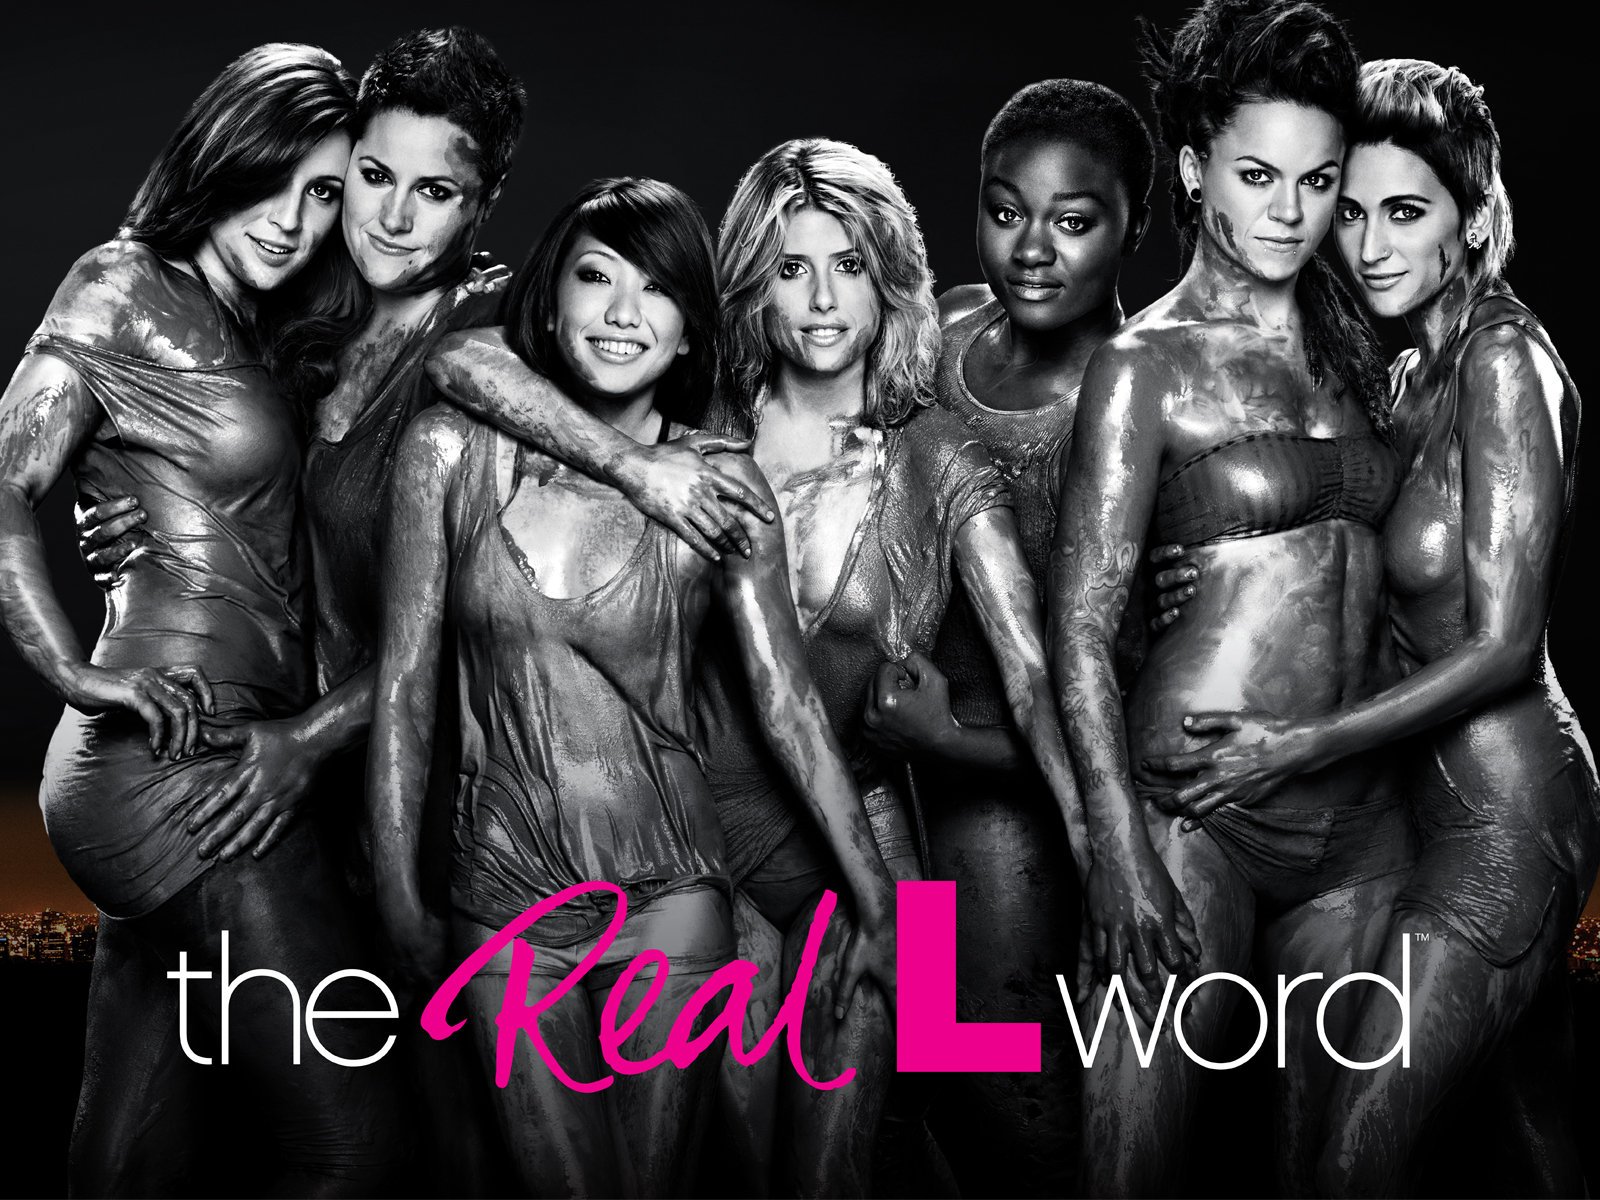 The Real L Word Season 3 on Showtime